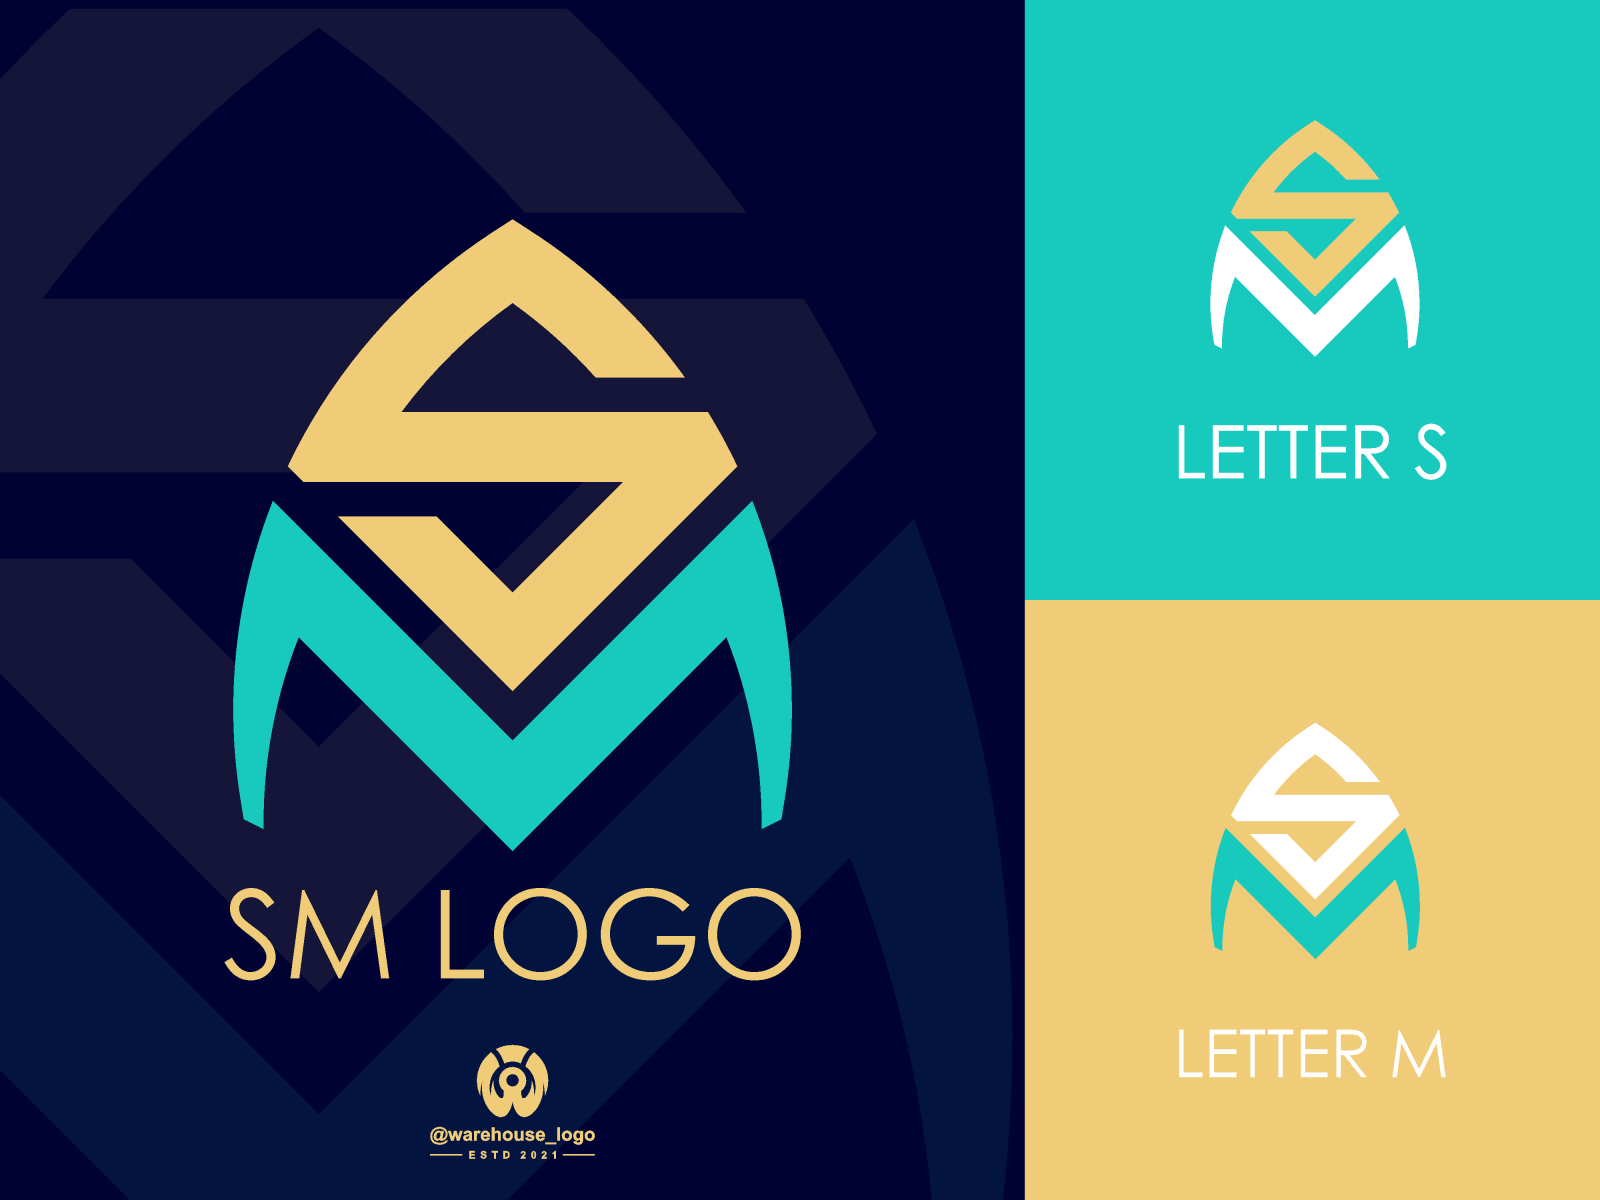 SM S M White Letter Logo Design With Black Square Vector Illustration  Template. Royalty Free SVG, Cliparts, Vectors, and Stock Illustration.  Image 75160820.